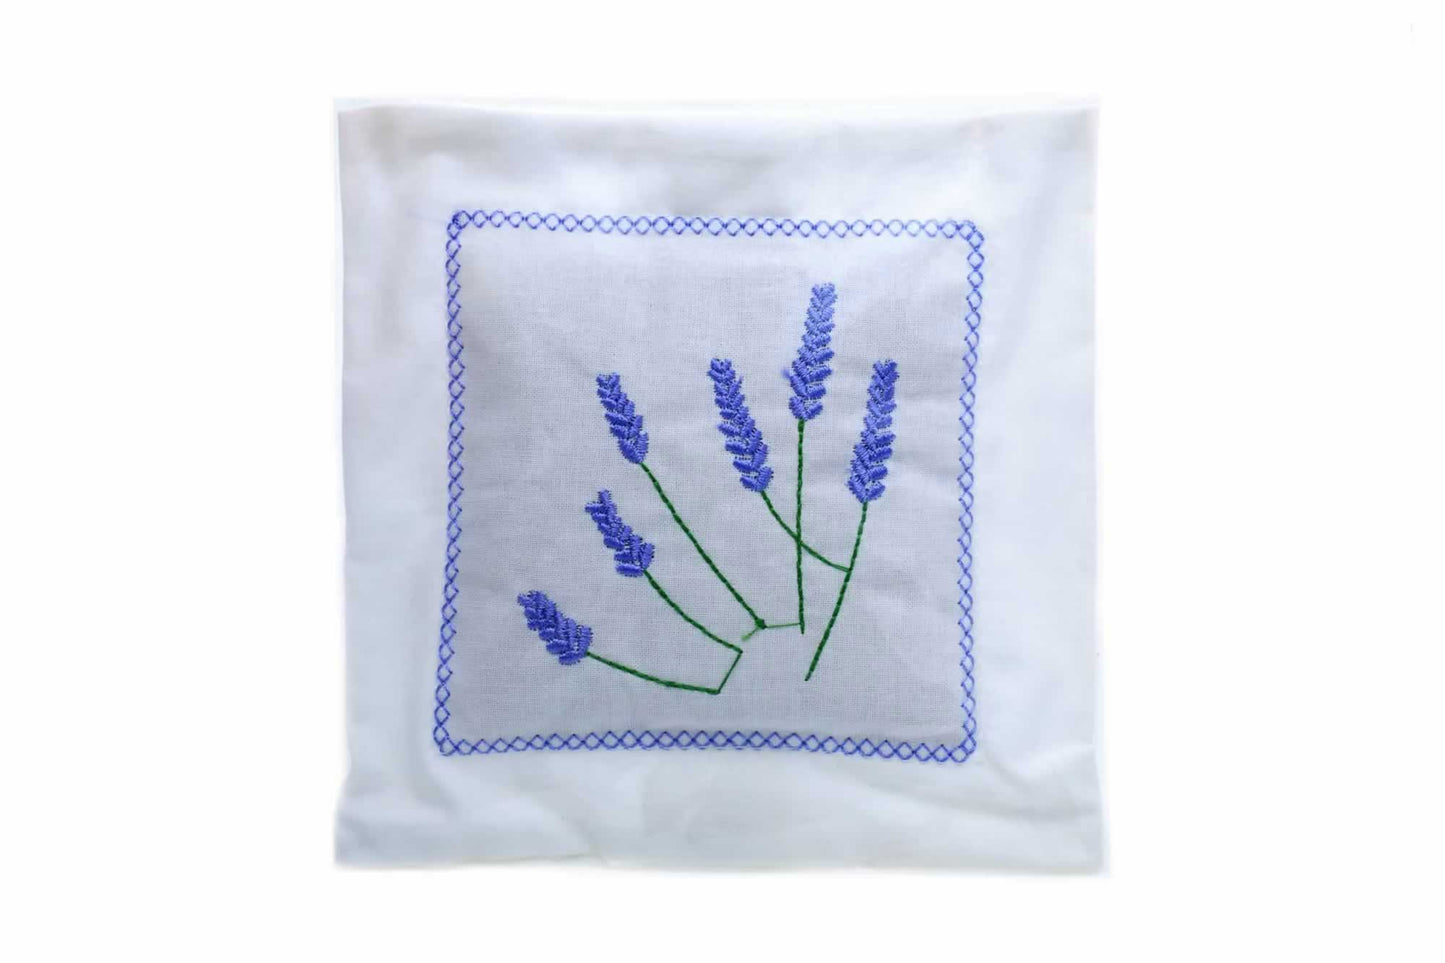 Hand-embroidered lavender pillow - washable and reusable